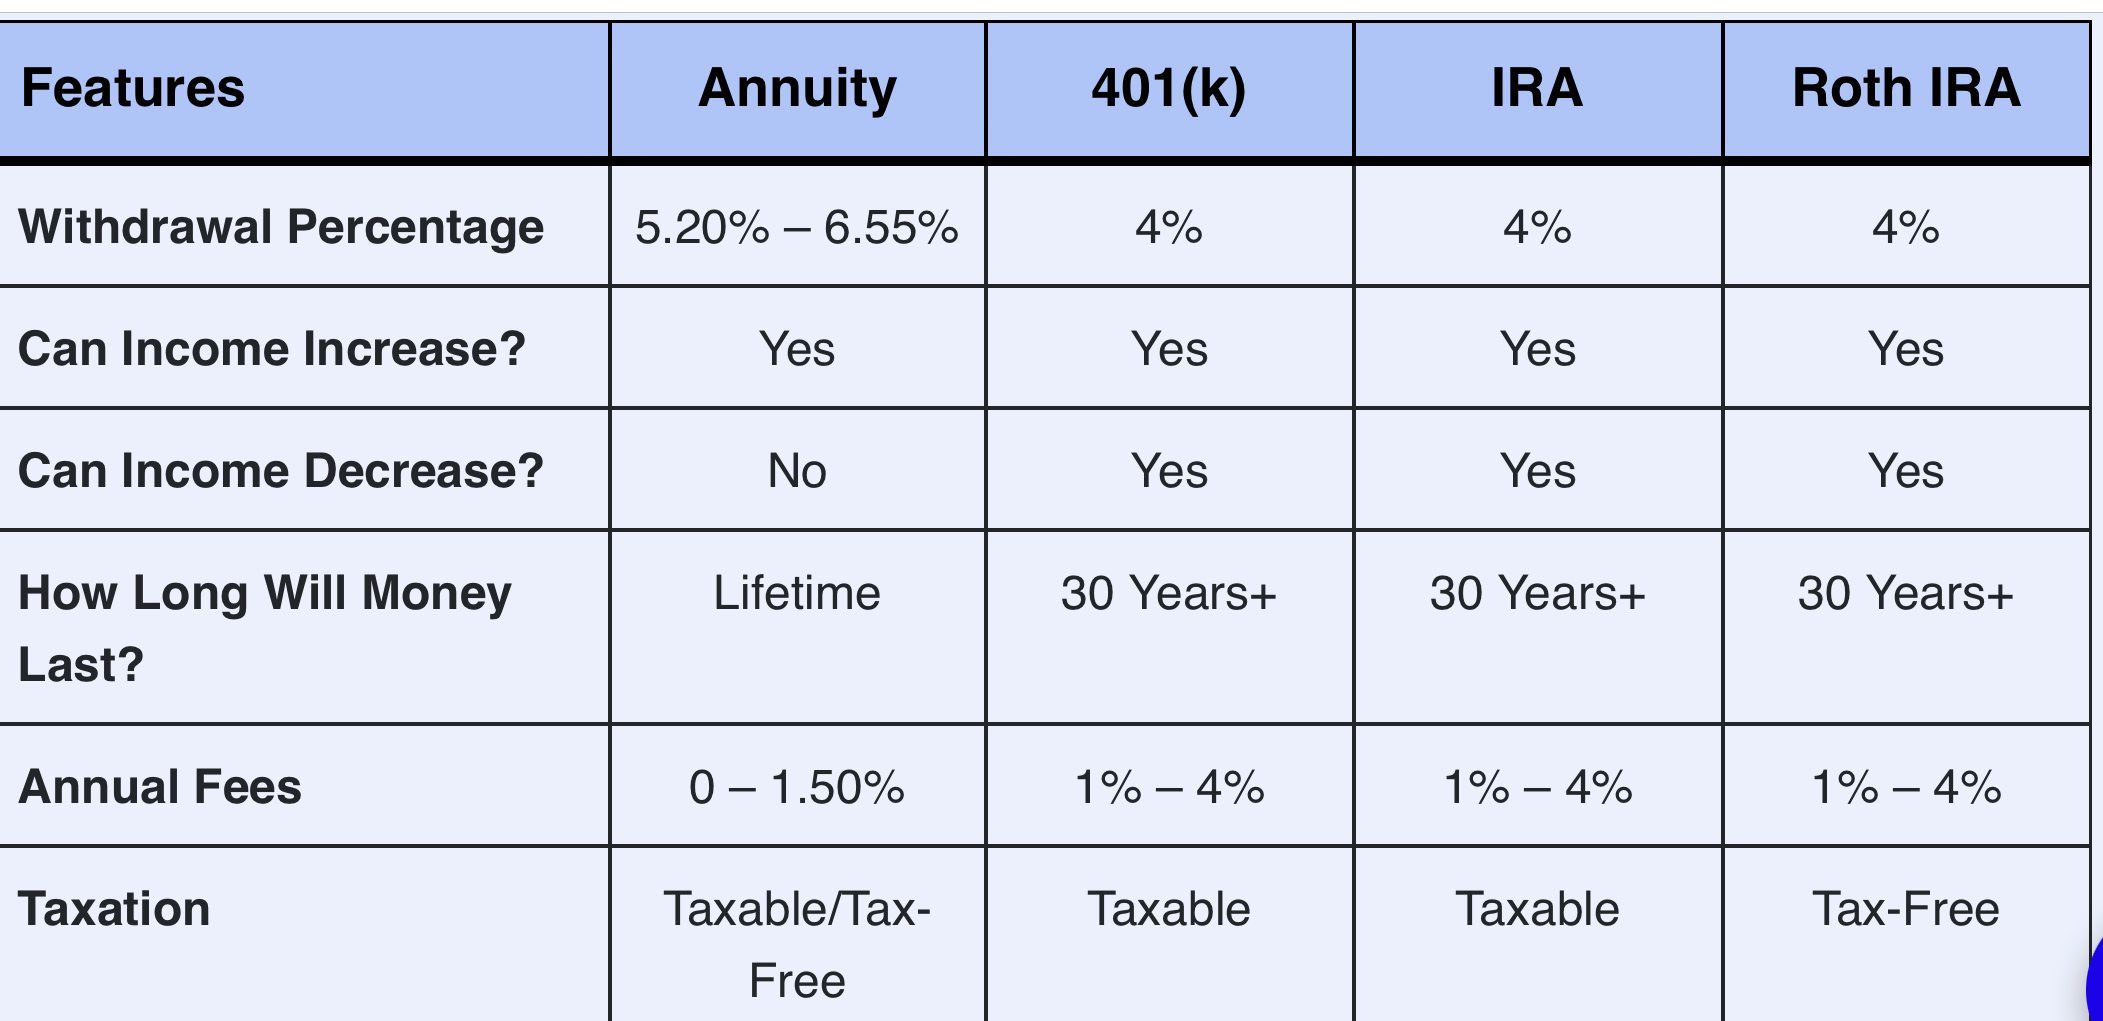 The table below compares the average income that can be withdrawn from investment accounts safely regardless of retirement age.